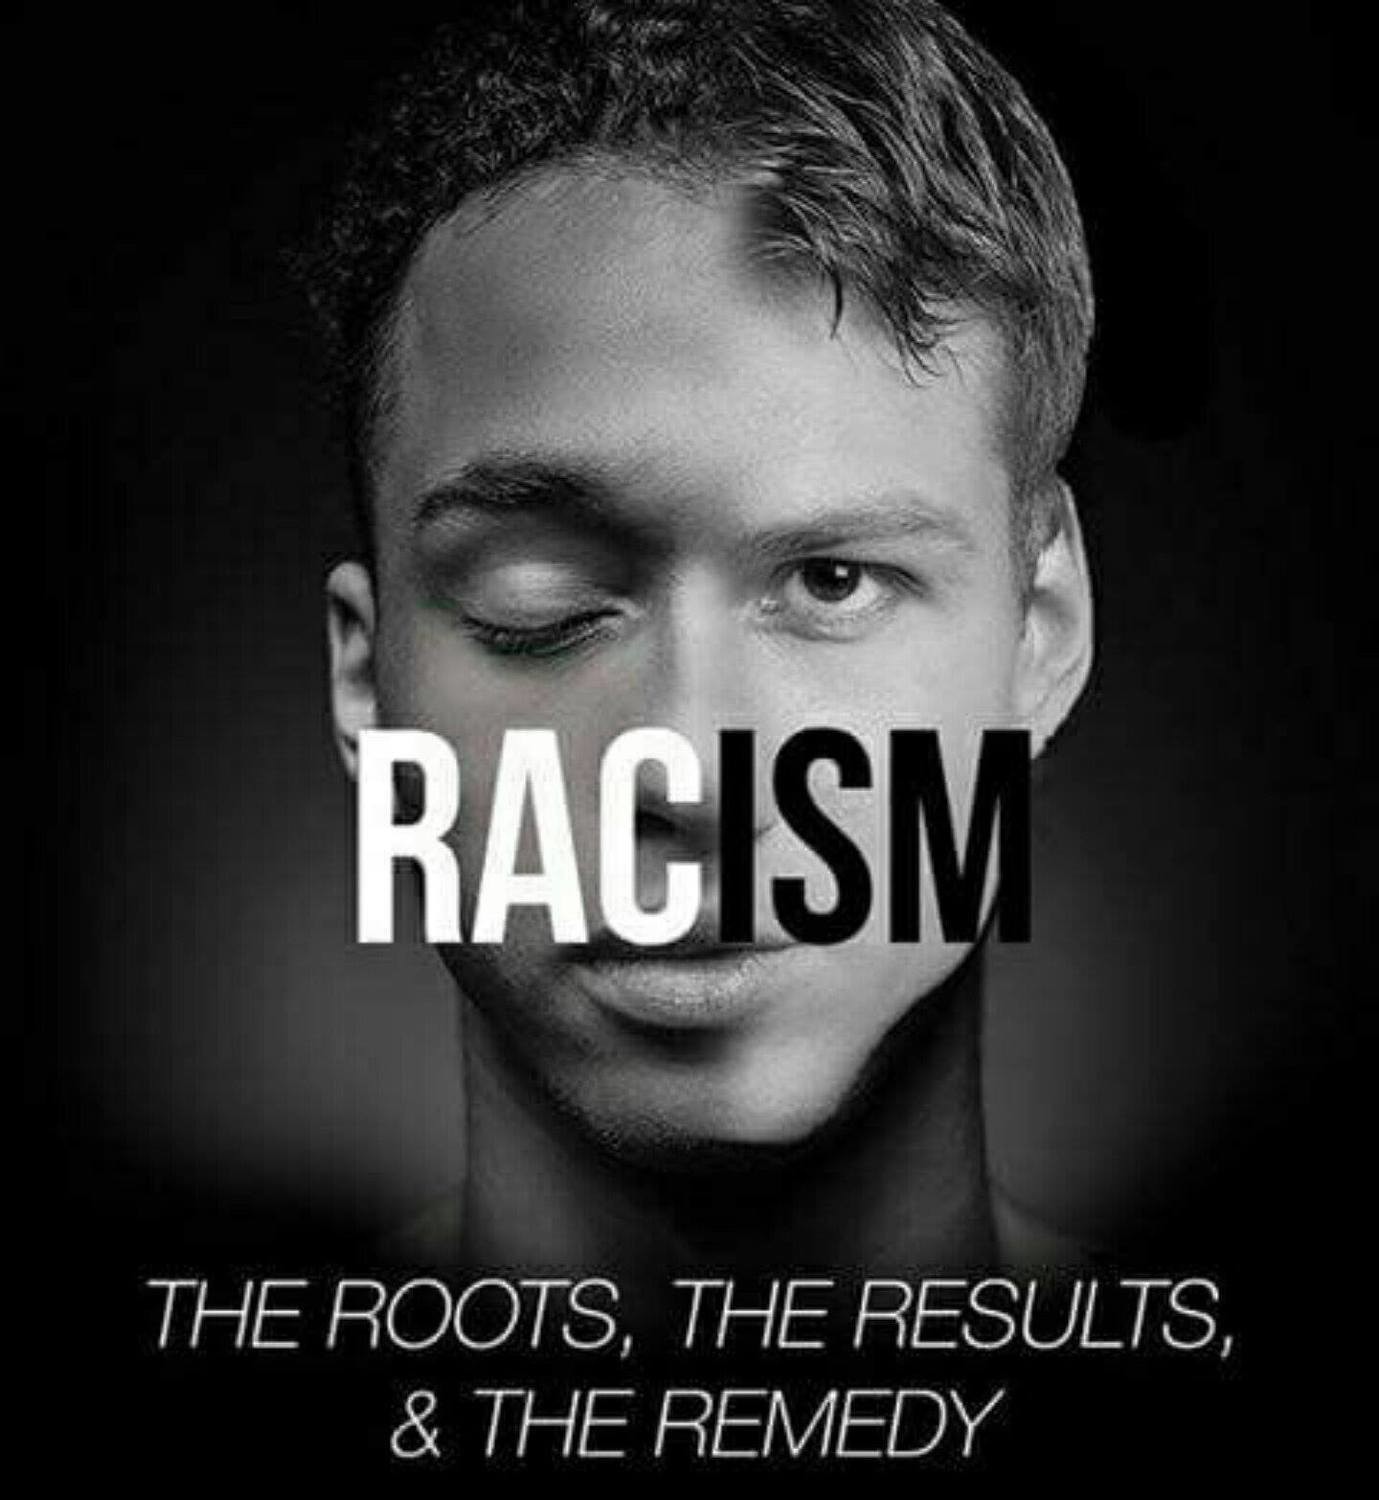 Racism The Roots, The Results and The Remedy - Bishop Douglas White - PARTS 1 & 2